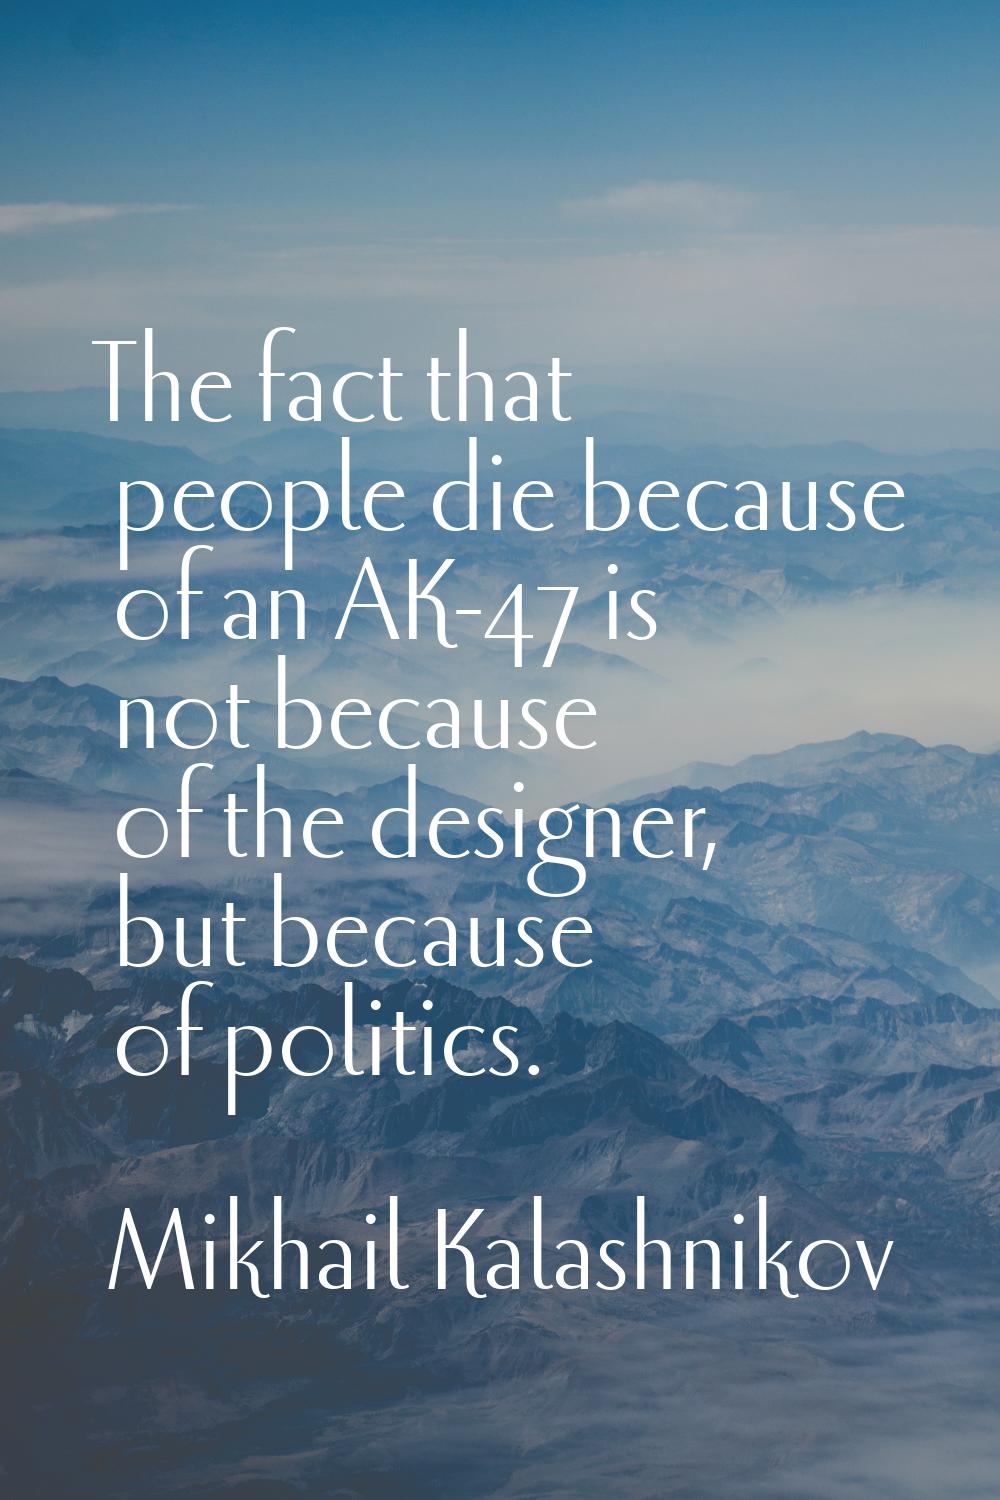 The fact that people die because of an AK-47 is not because of the designer, but because of politic